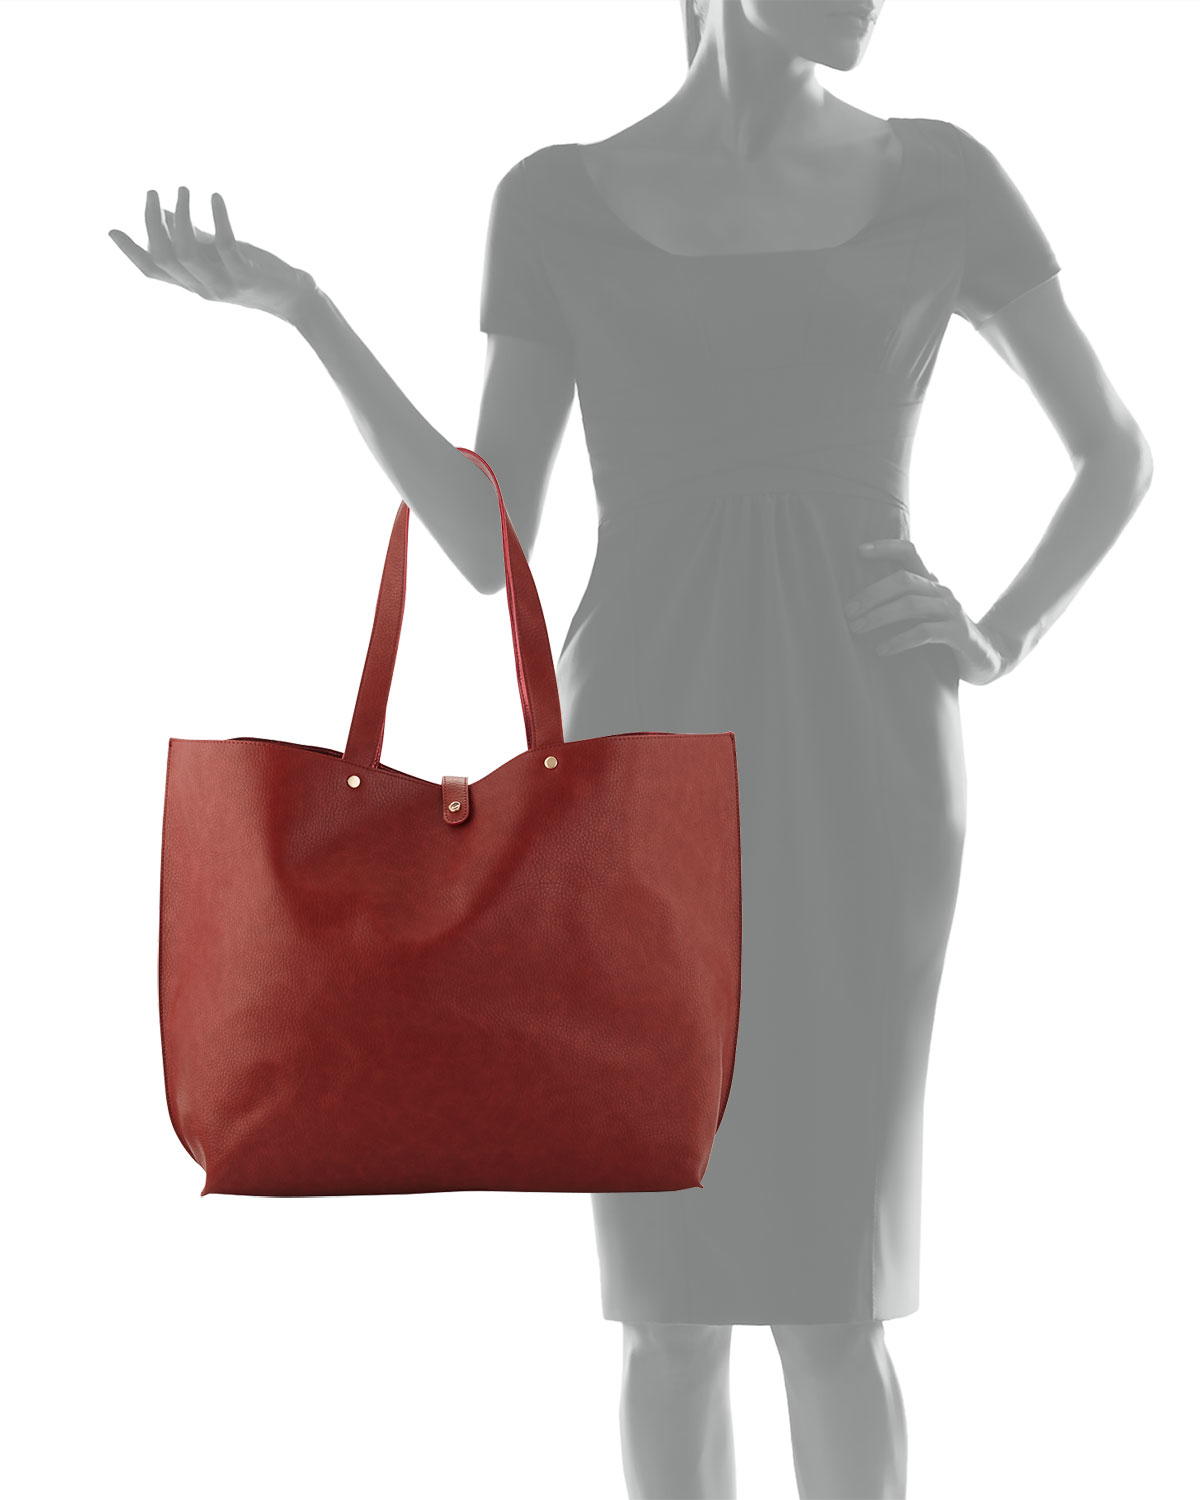 Neiman Marcus Large Pebbled Faux-leather Tote Bag in Bordeaux (Red) - Lyst